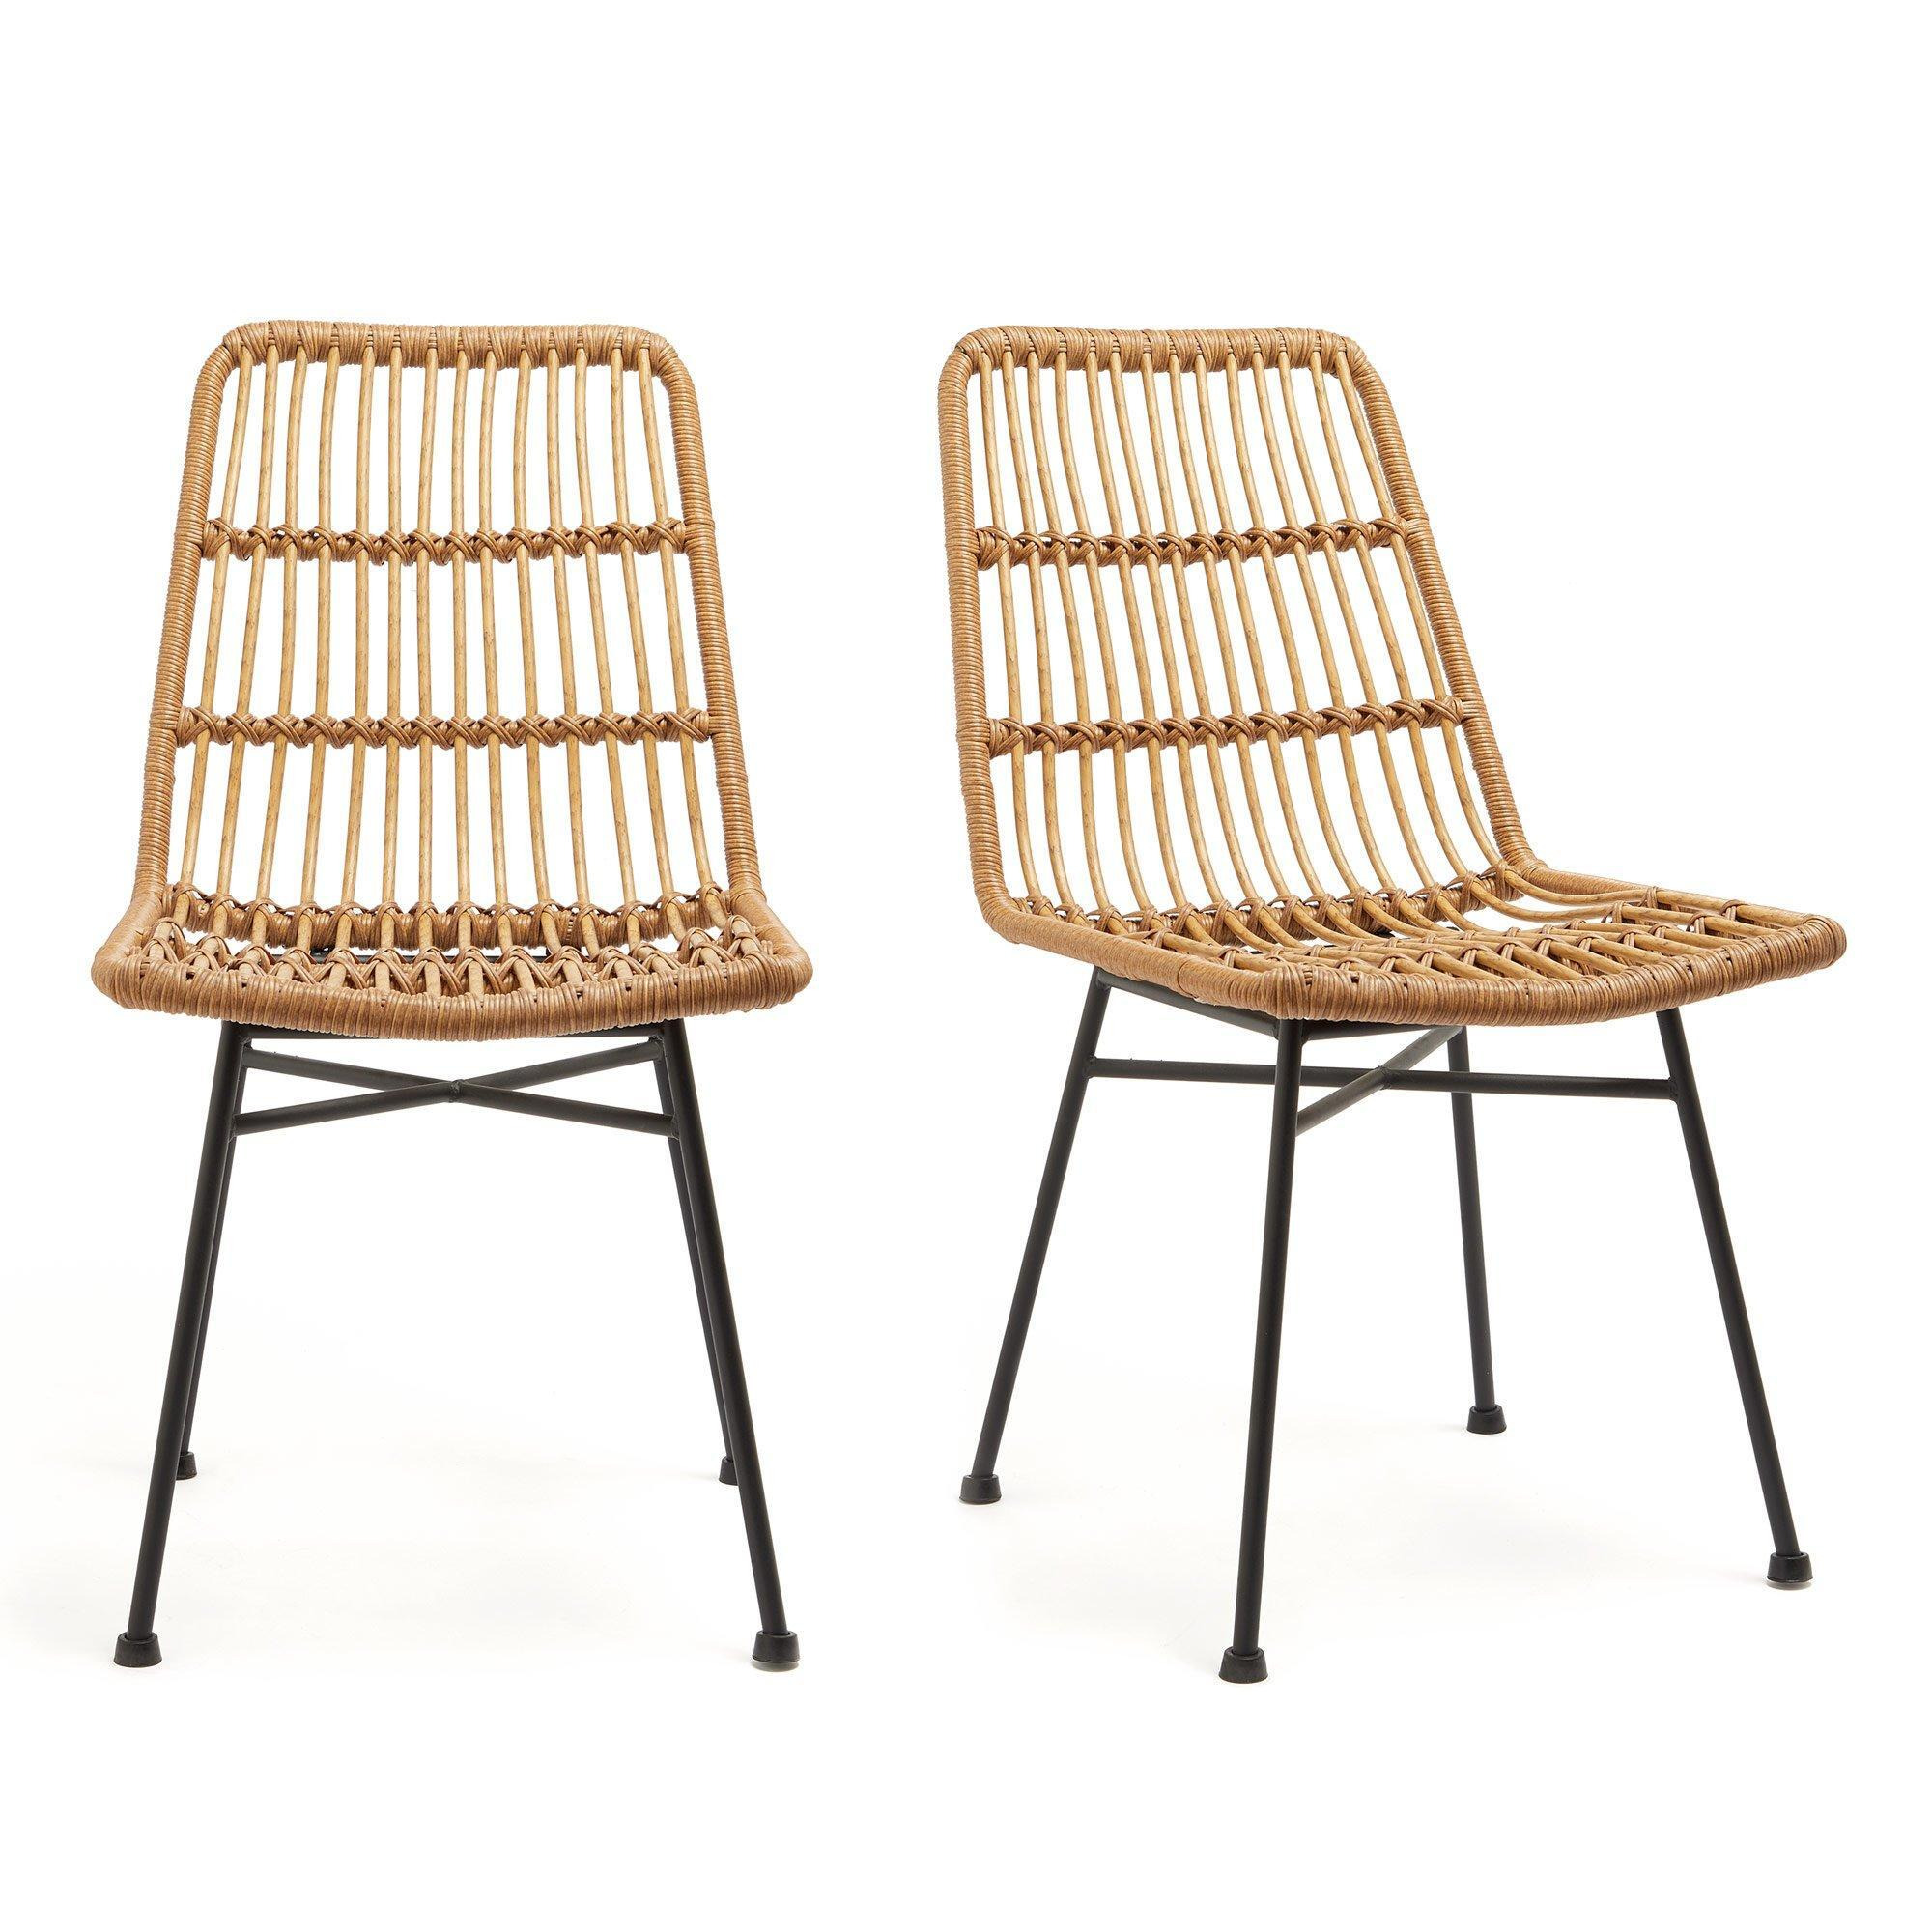 Rattan Reeded Wicker Kitchen Dining Chairs - image 1